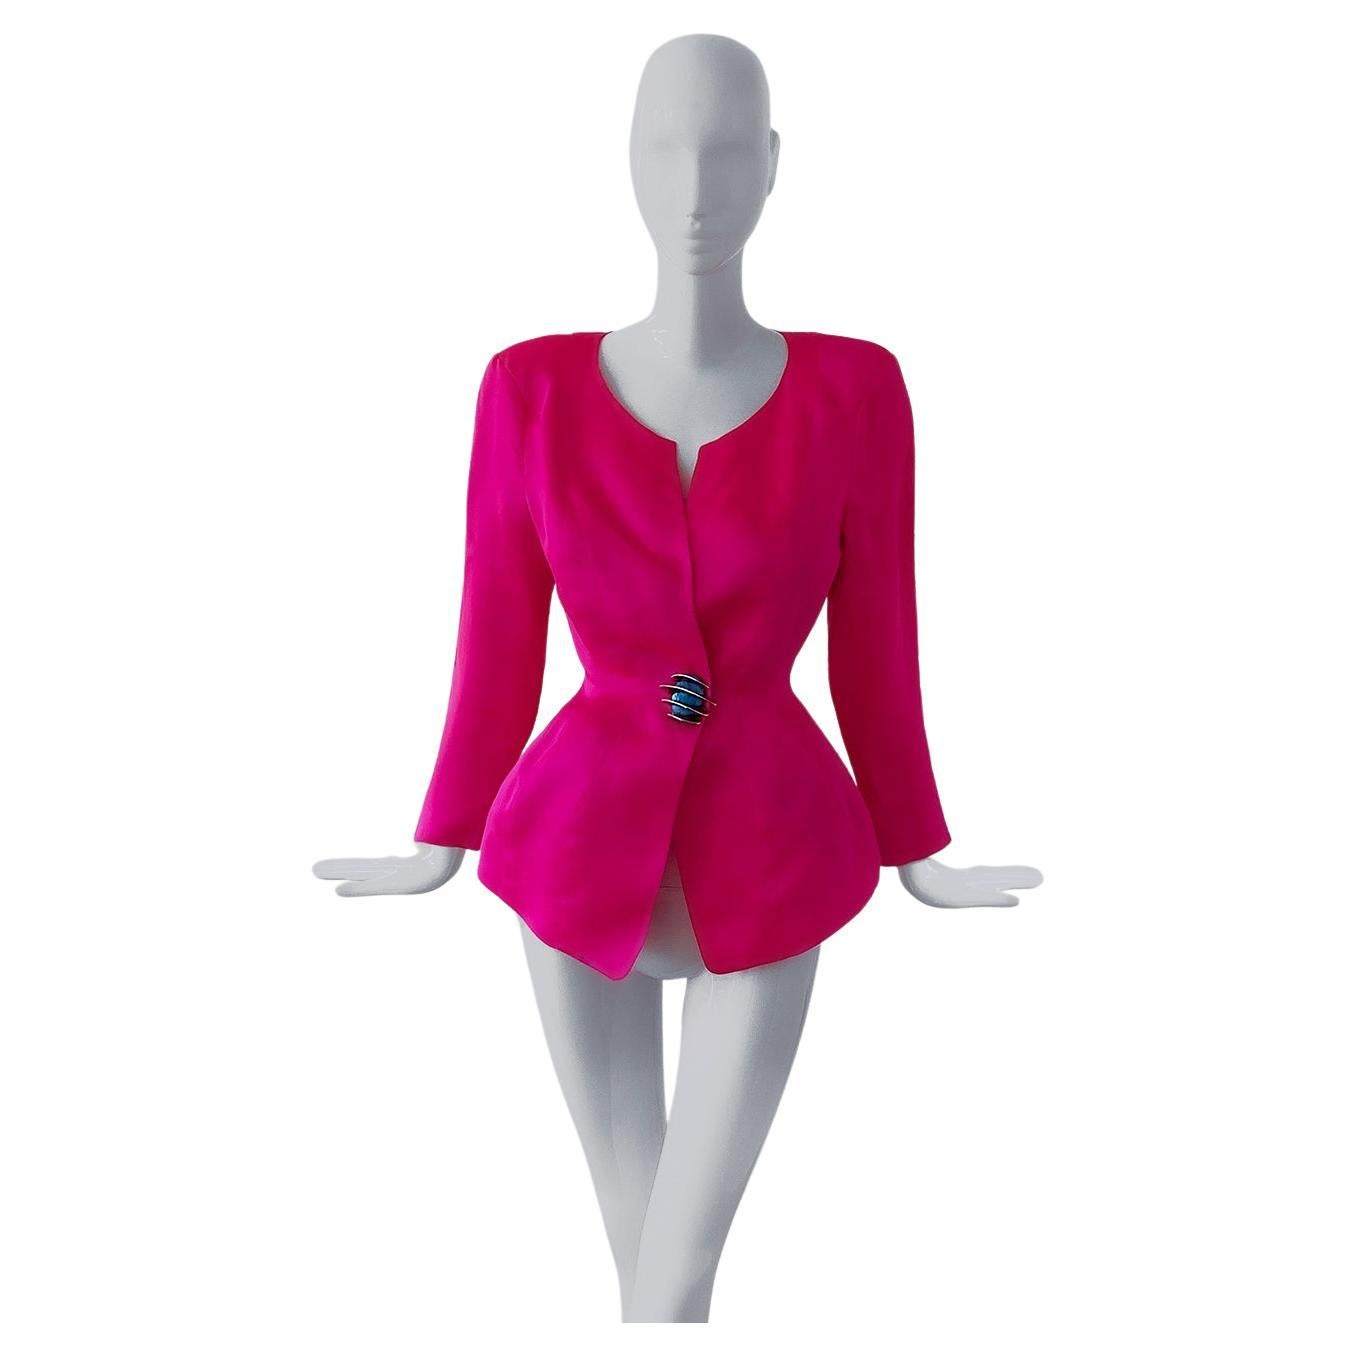 Fabulous Rare HOT Pink Thierry Mugler Jacket Pure Silk Silver Metal Button Eleme For Sale